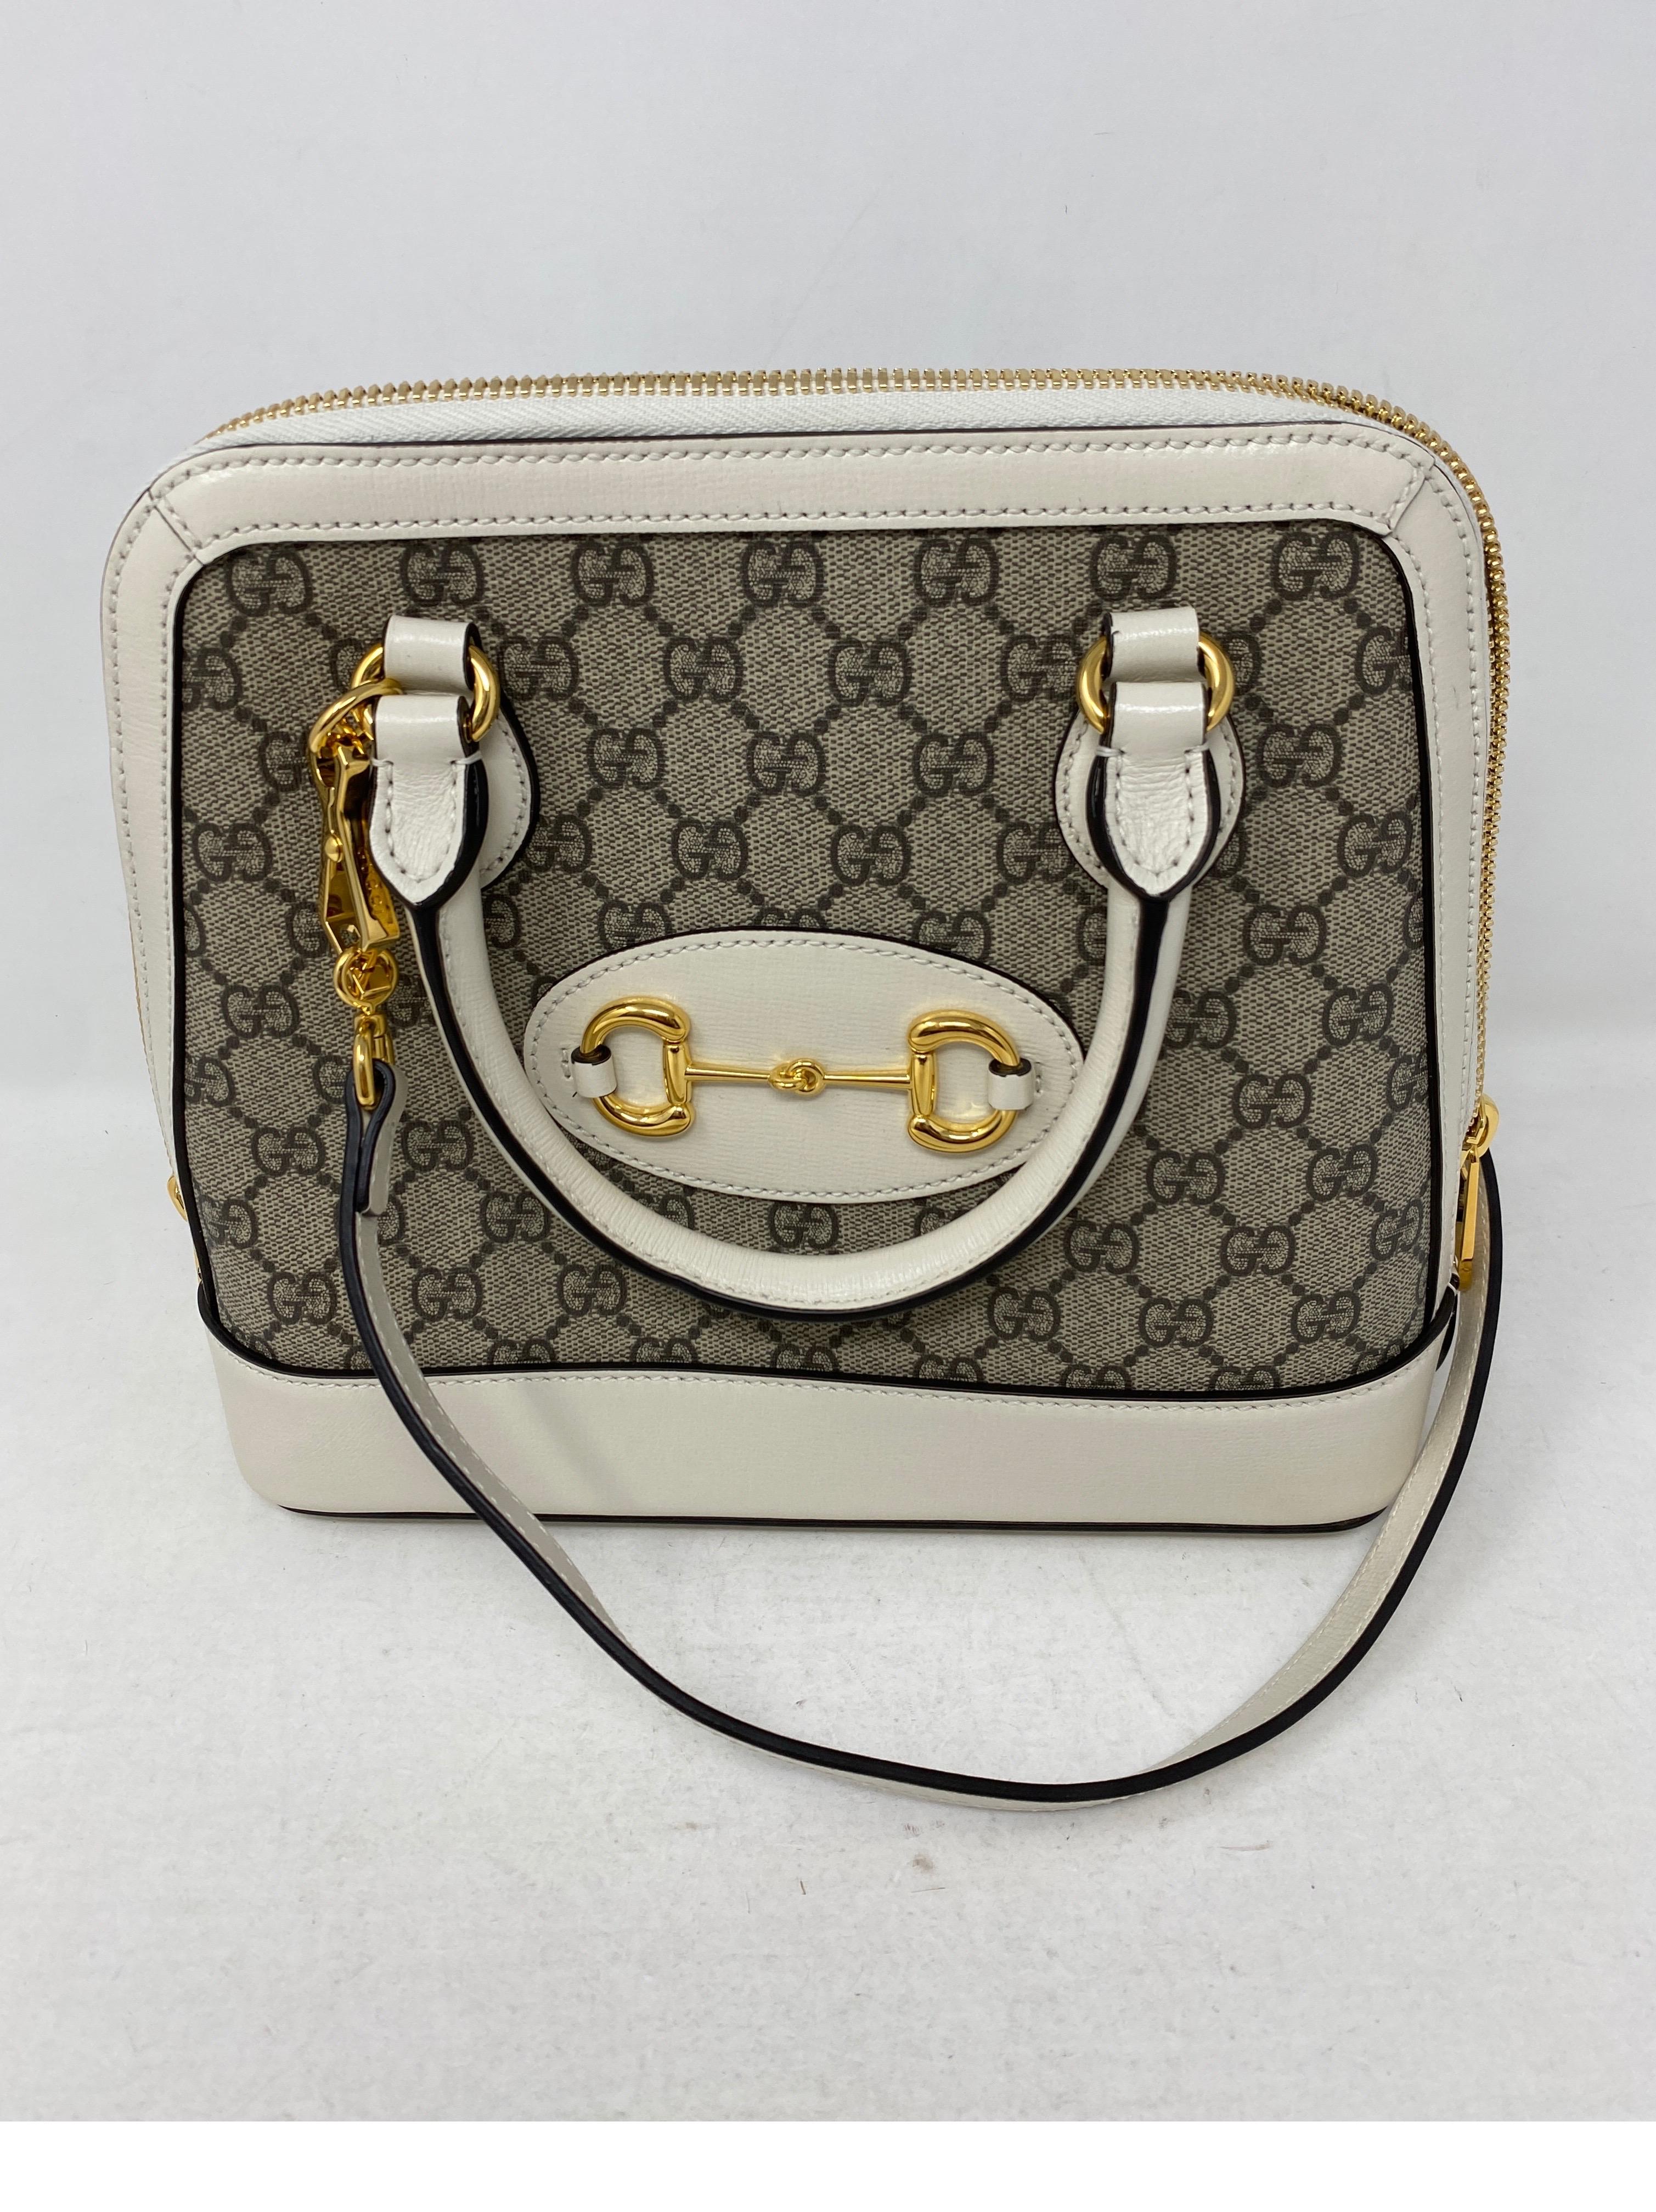 Gucci Cream Monogram Horsebit Bag. Leather and Gucci canvas. Gold hardware. Excellent like new condition. Guaranteed authentic. 